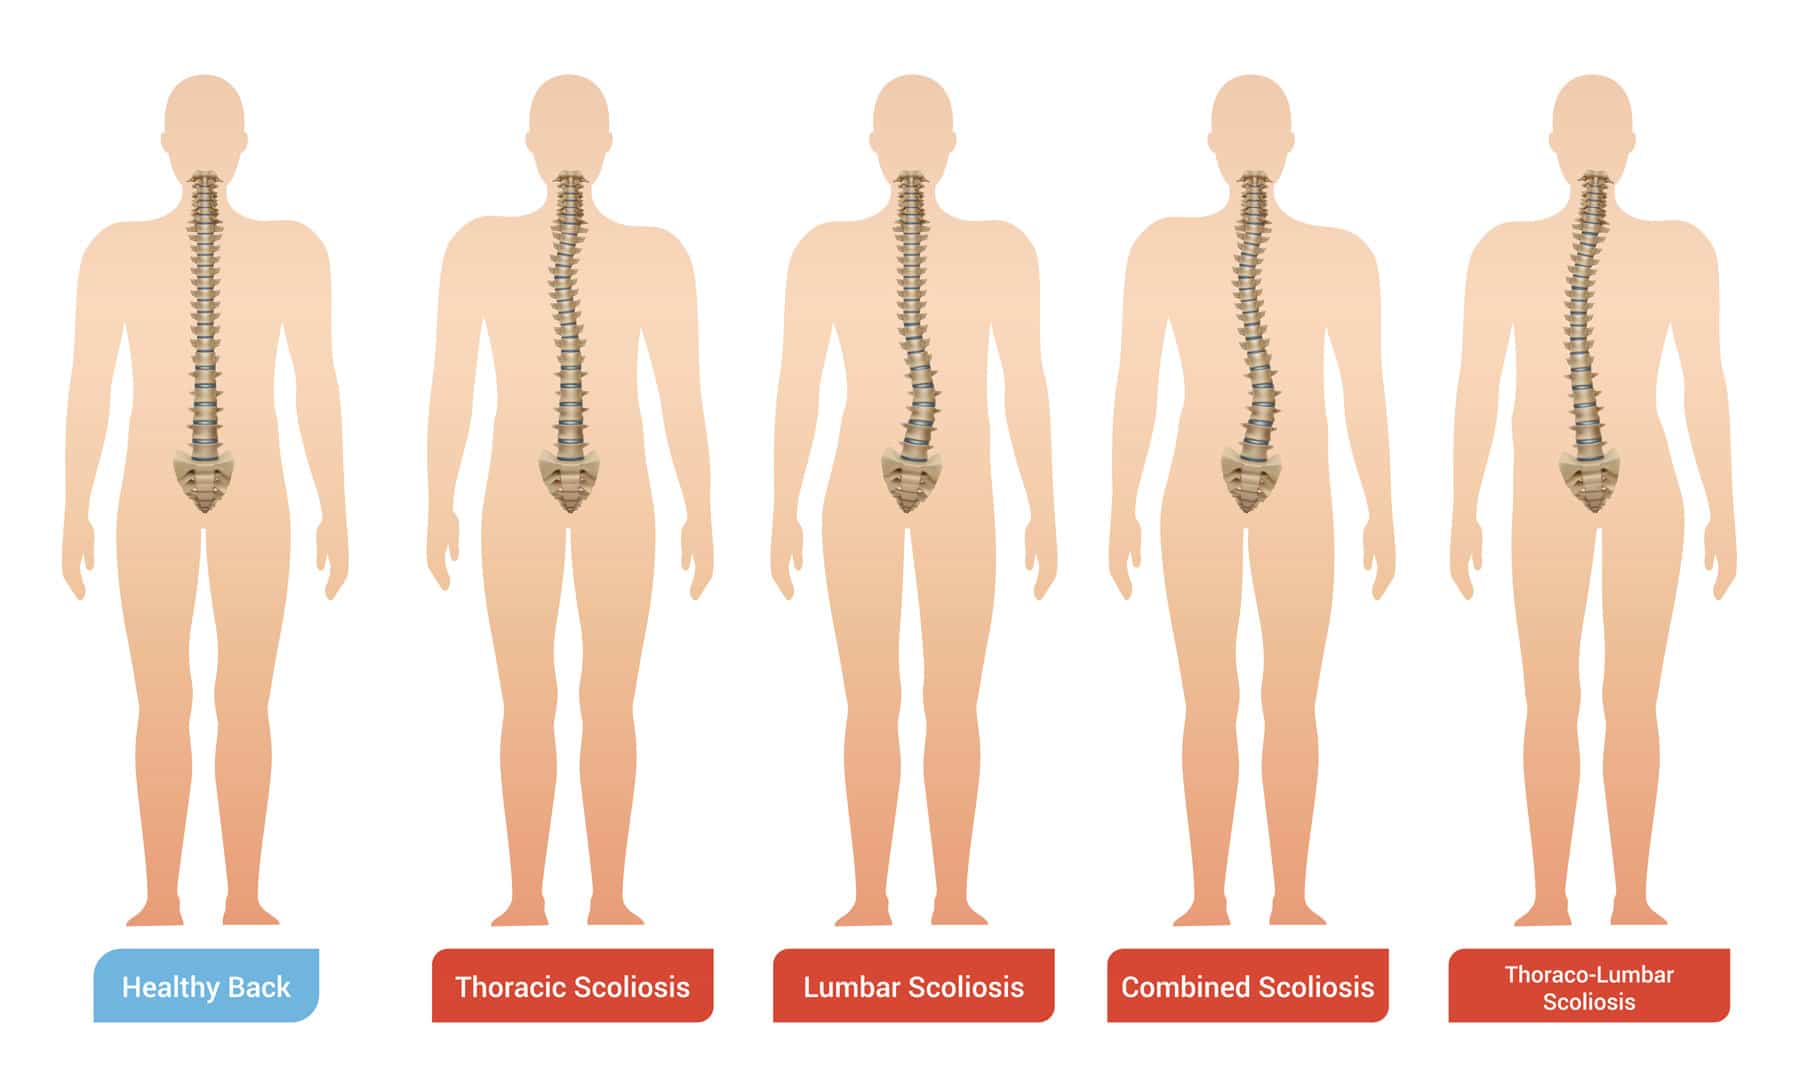 Scoliosis Surgery: Causes, Symptoms, and Treatment